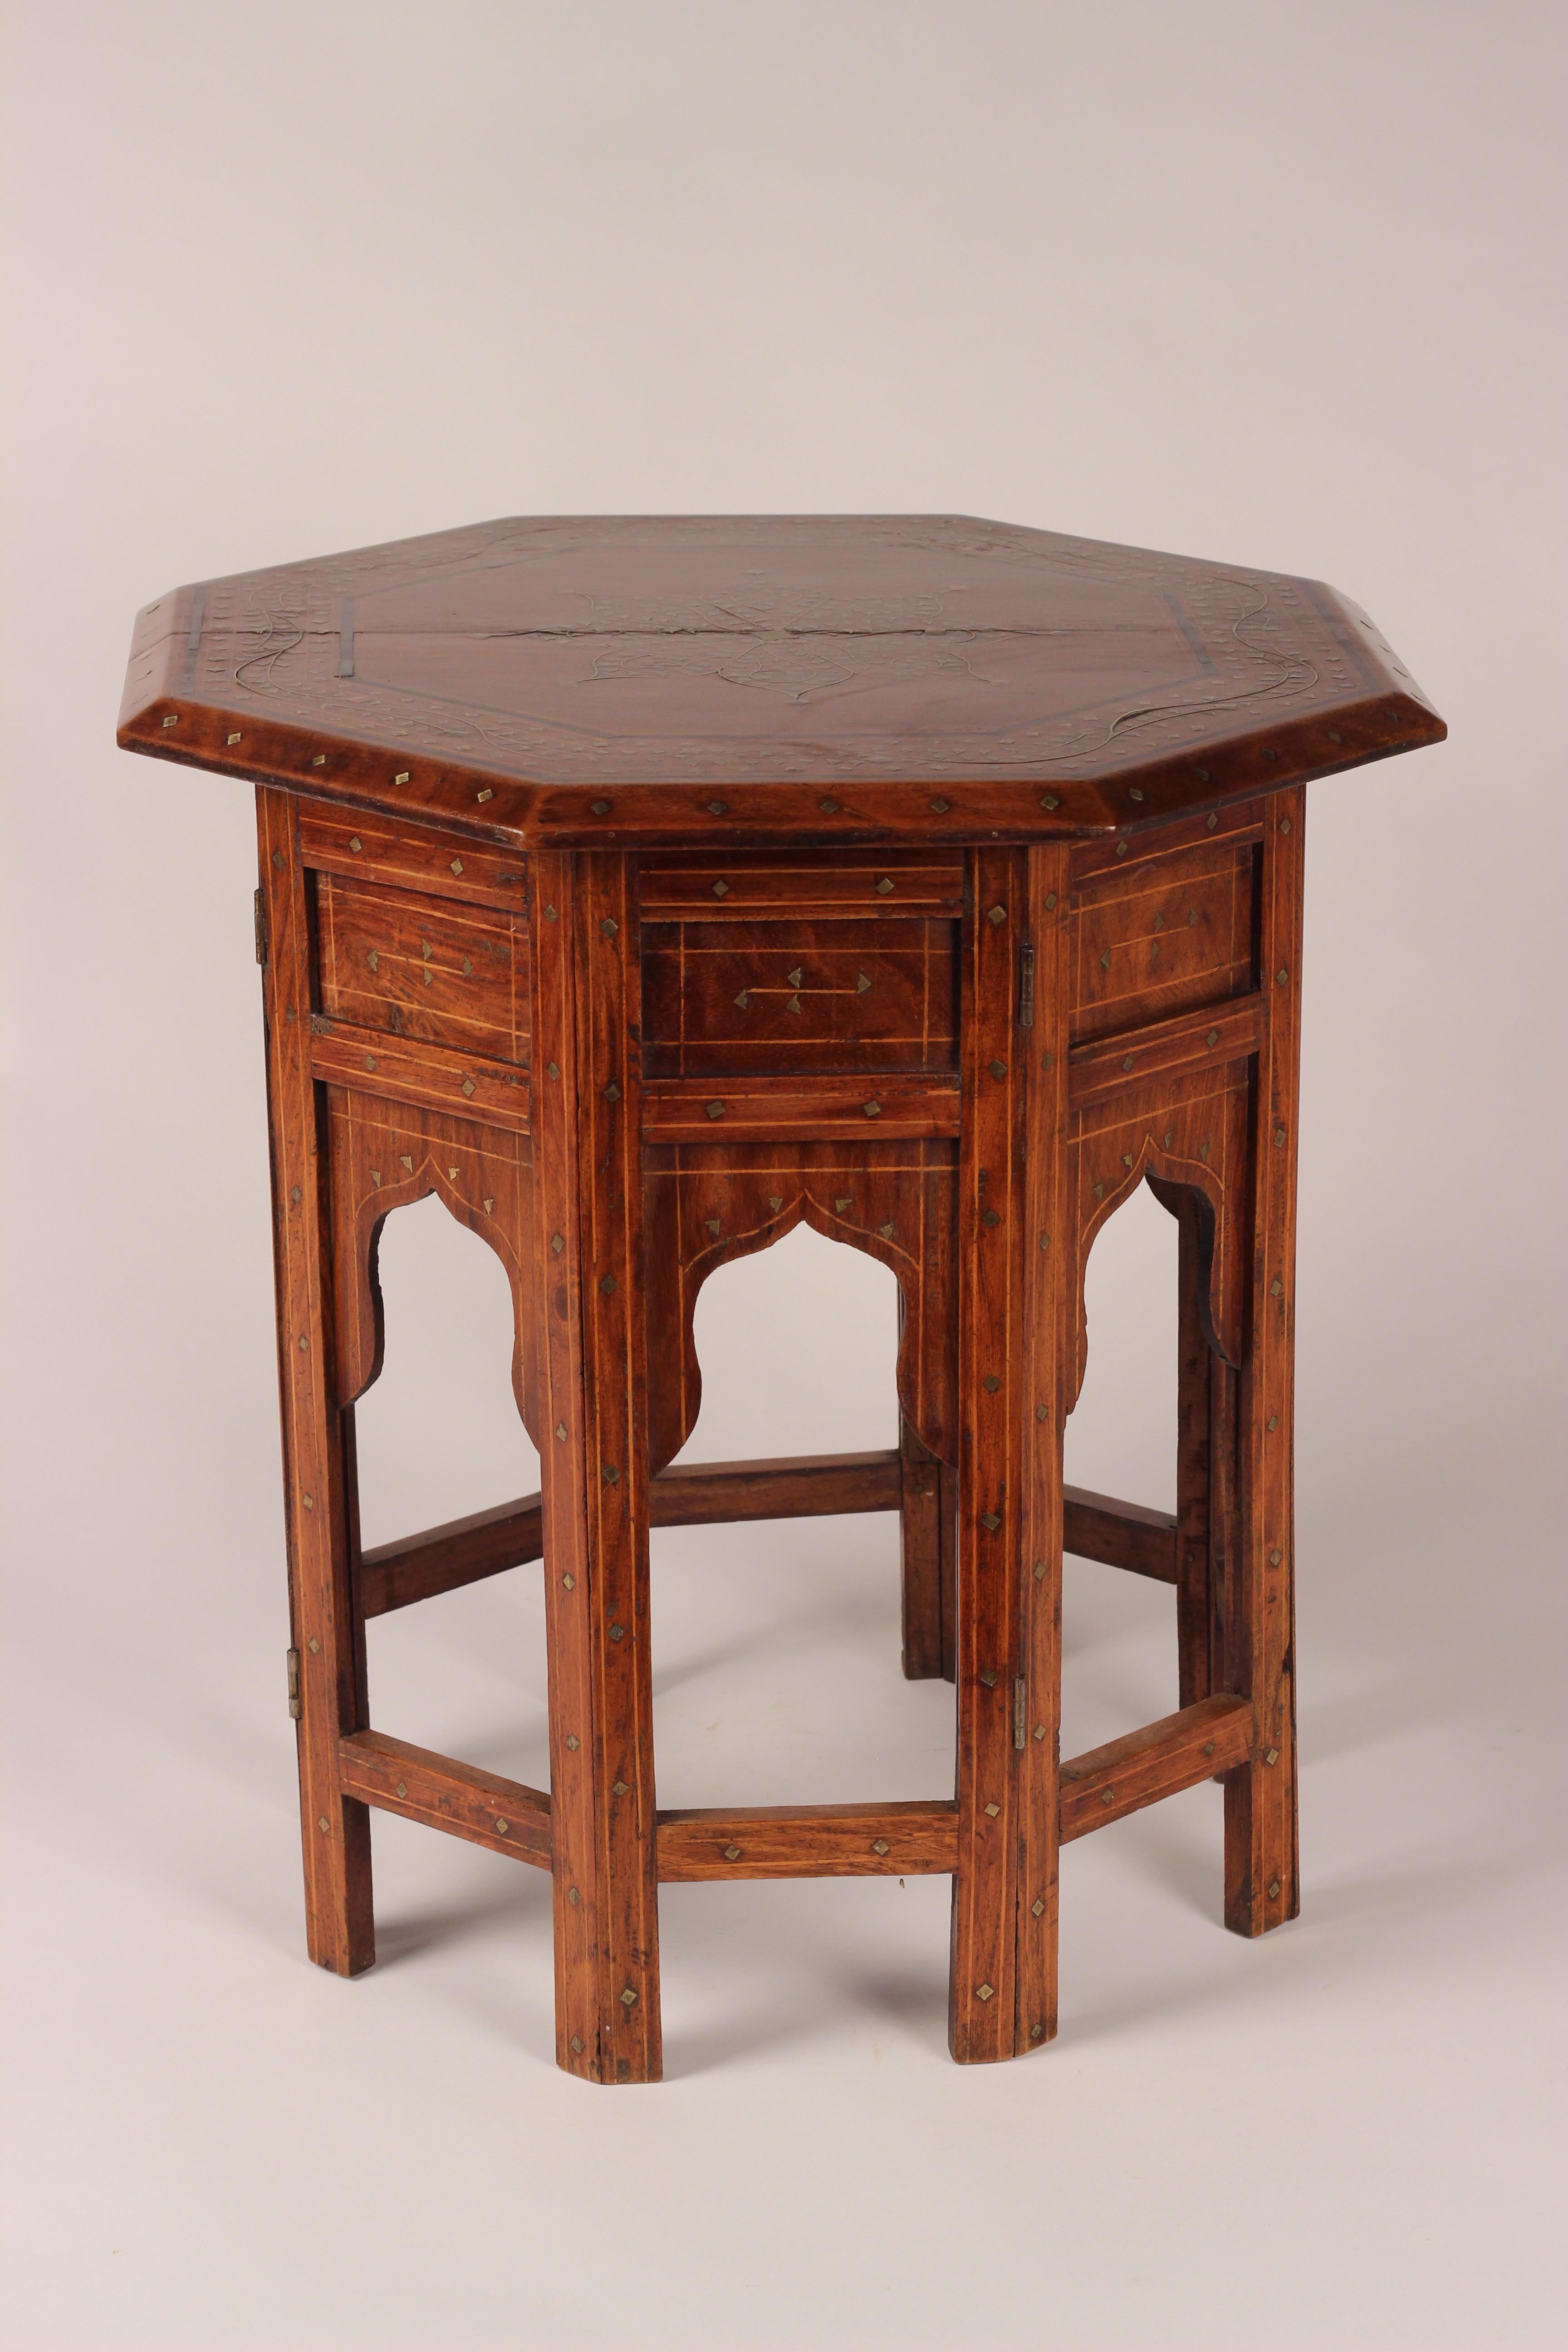 Late 19th Century Boho Chic Style Anglo Indian Bombay Rosewood and Brass Inlay Octagonal Table For Sale